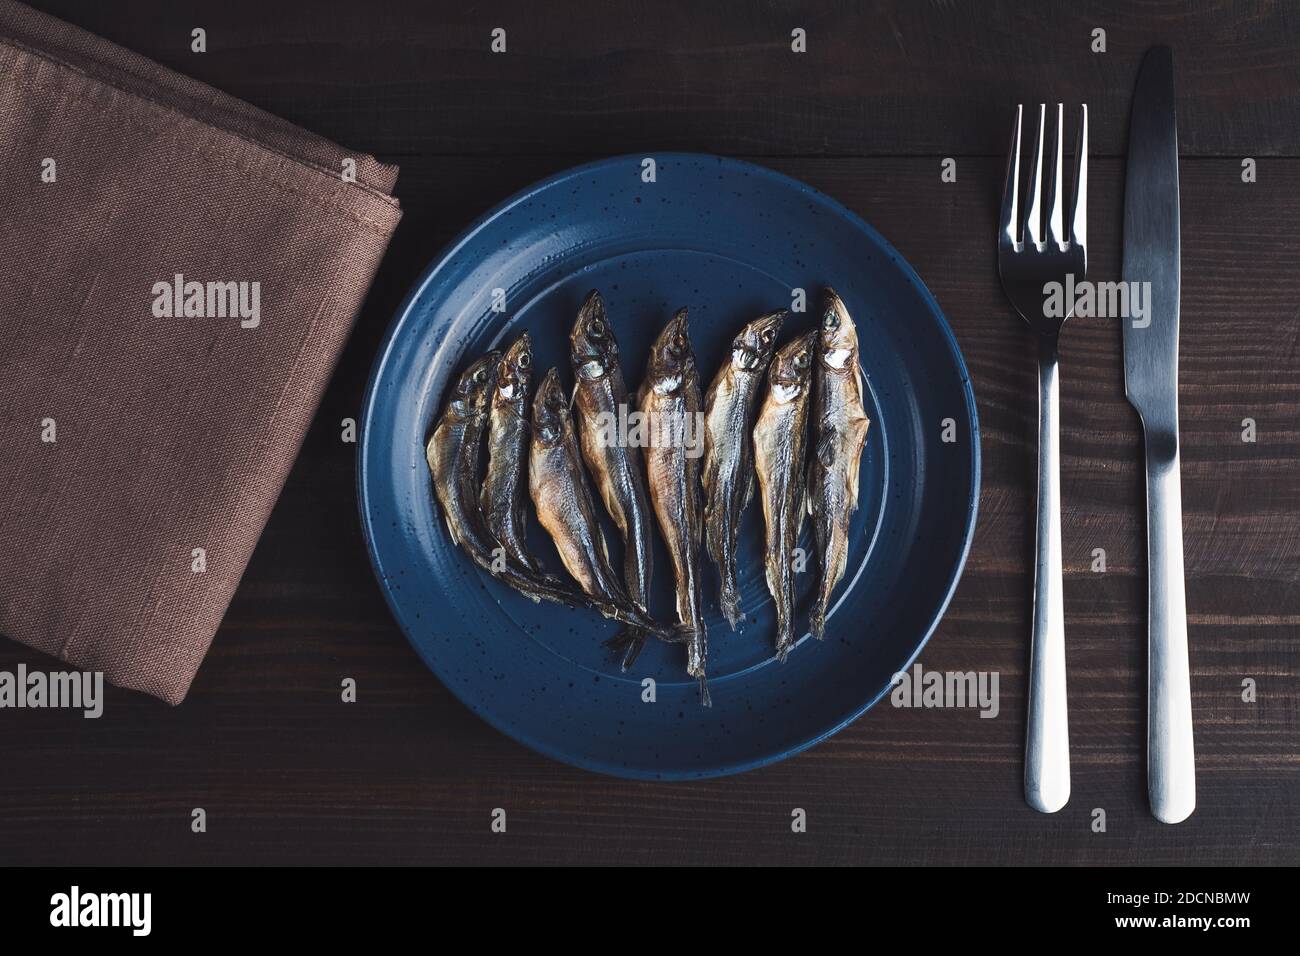 Salted dried fishes on plate. Stock Photo